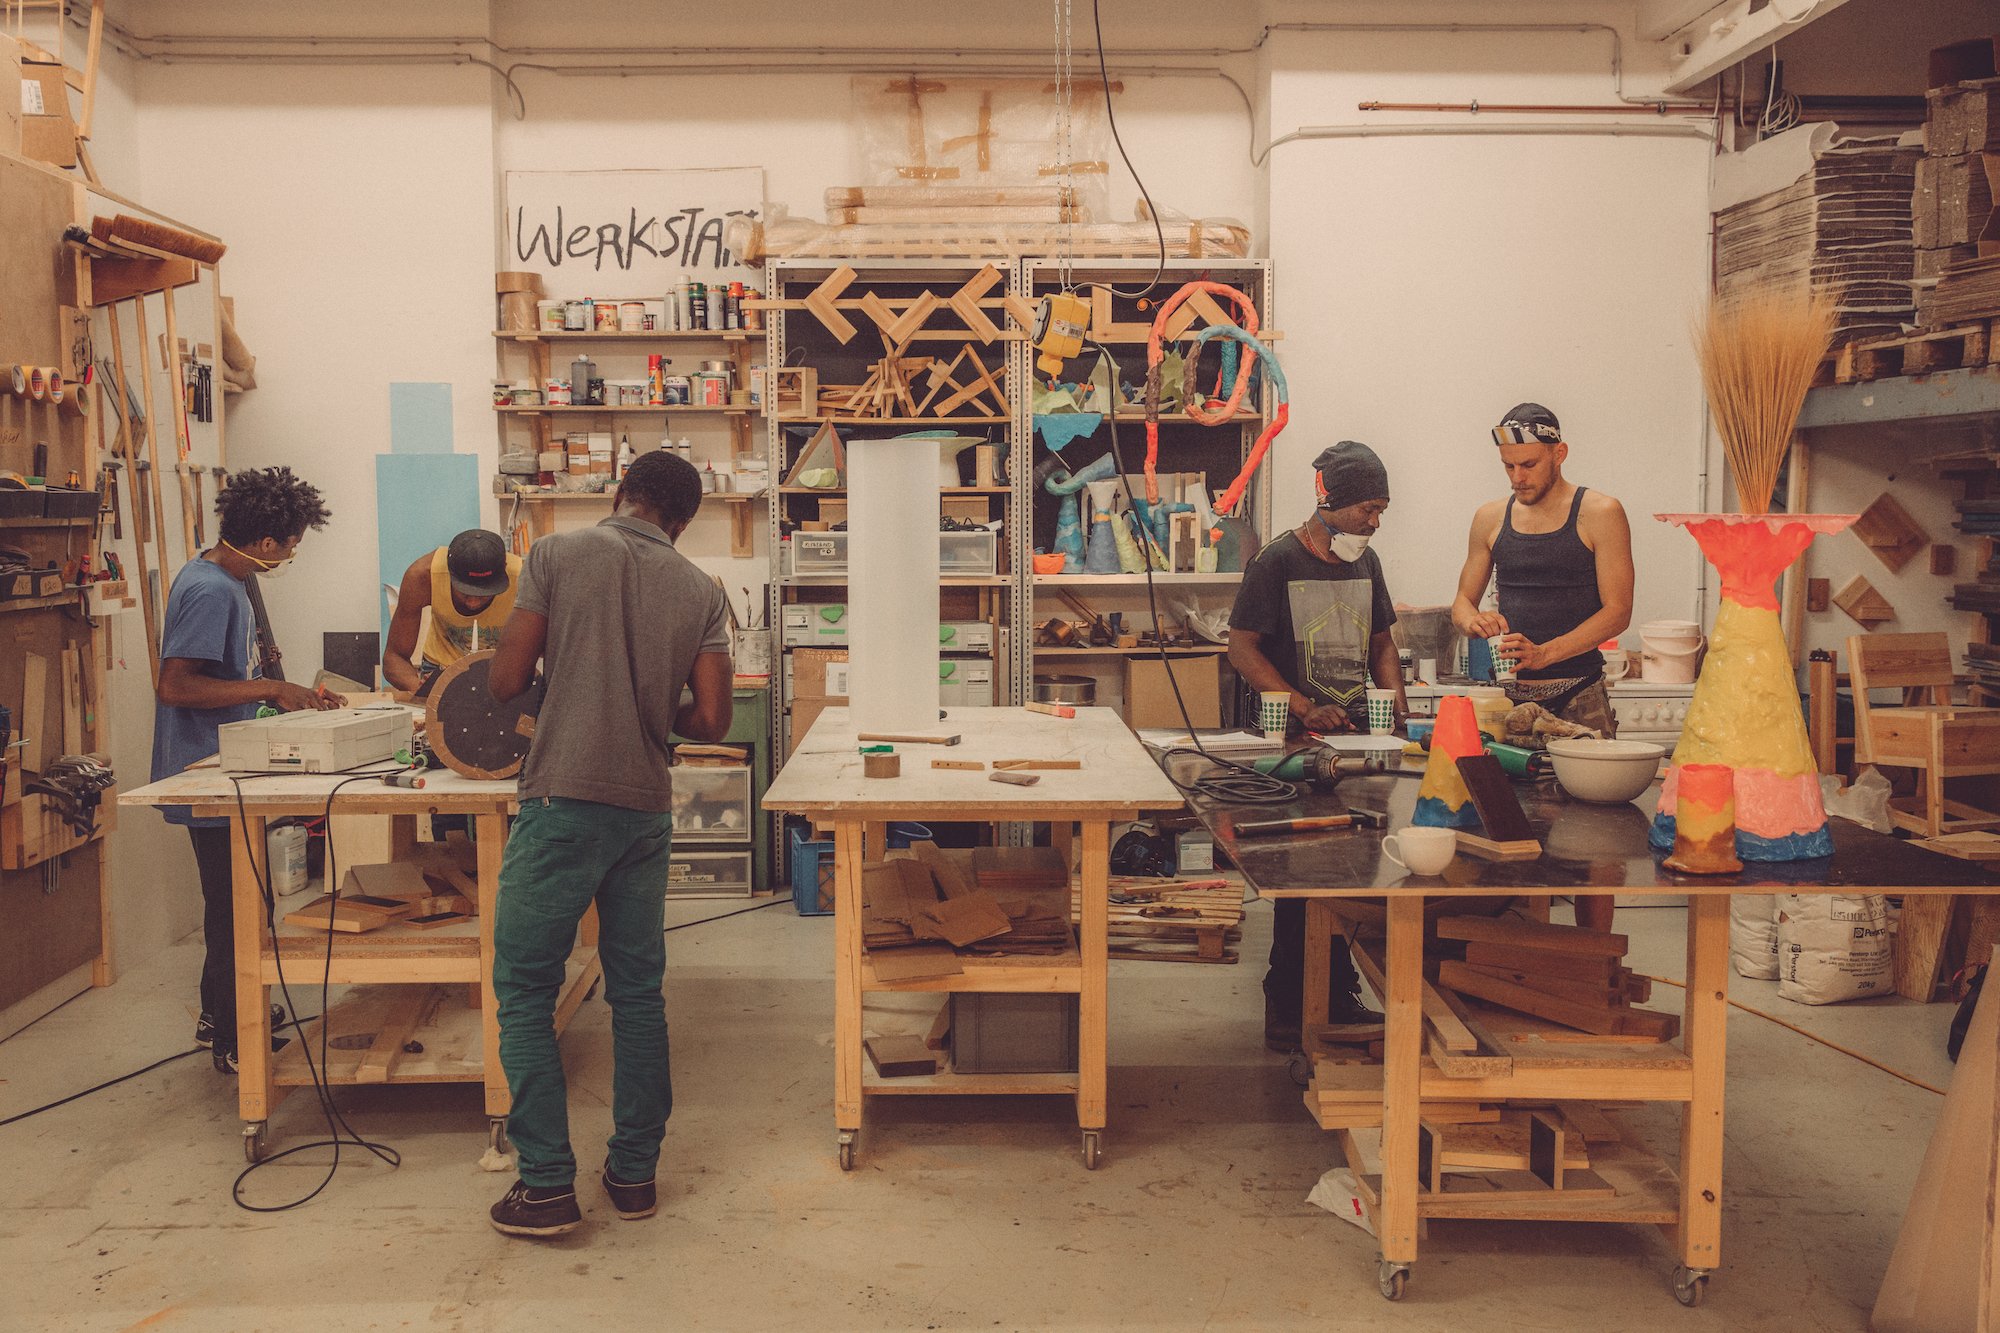  The Cucula workshops are geared towards exploratory practice and research, with the participants working with mockups and moulding tools. From left: Malik Agachi, Luis Amado Djalo, Yousuf Karim, Ousmane Ba and Yanik Balzer. 